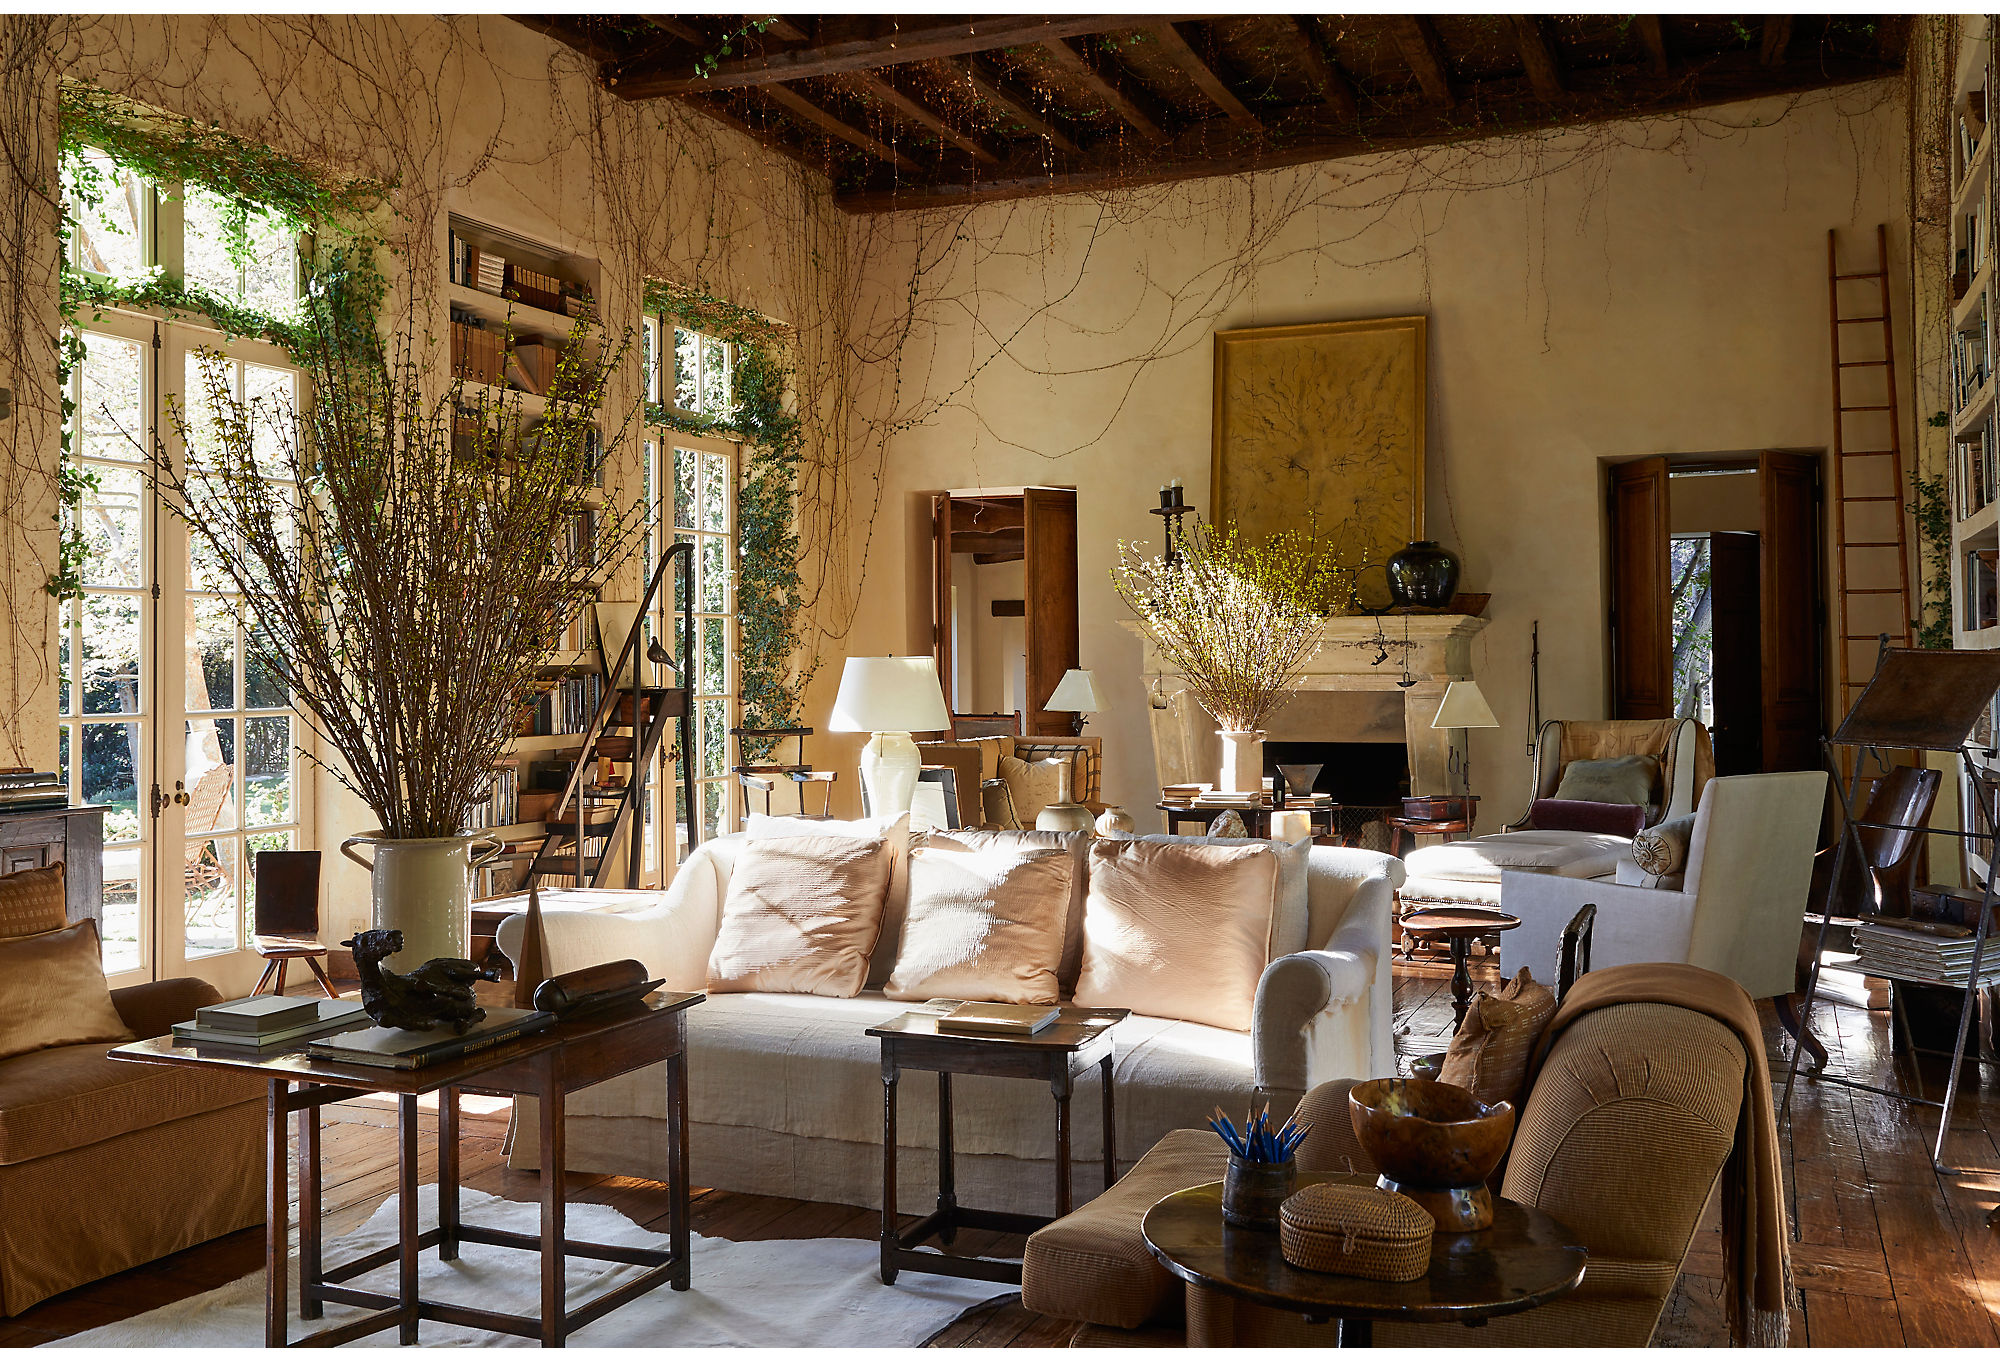 The home of Rose Tarlow.
